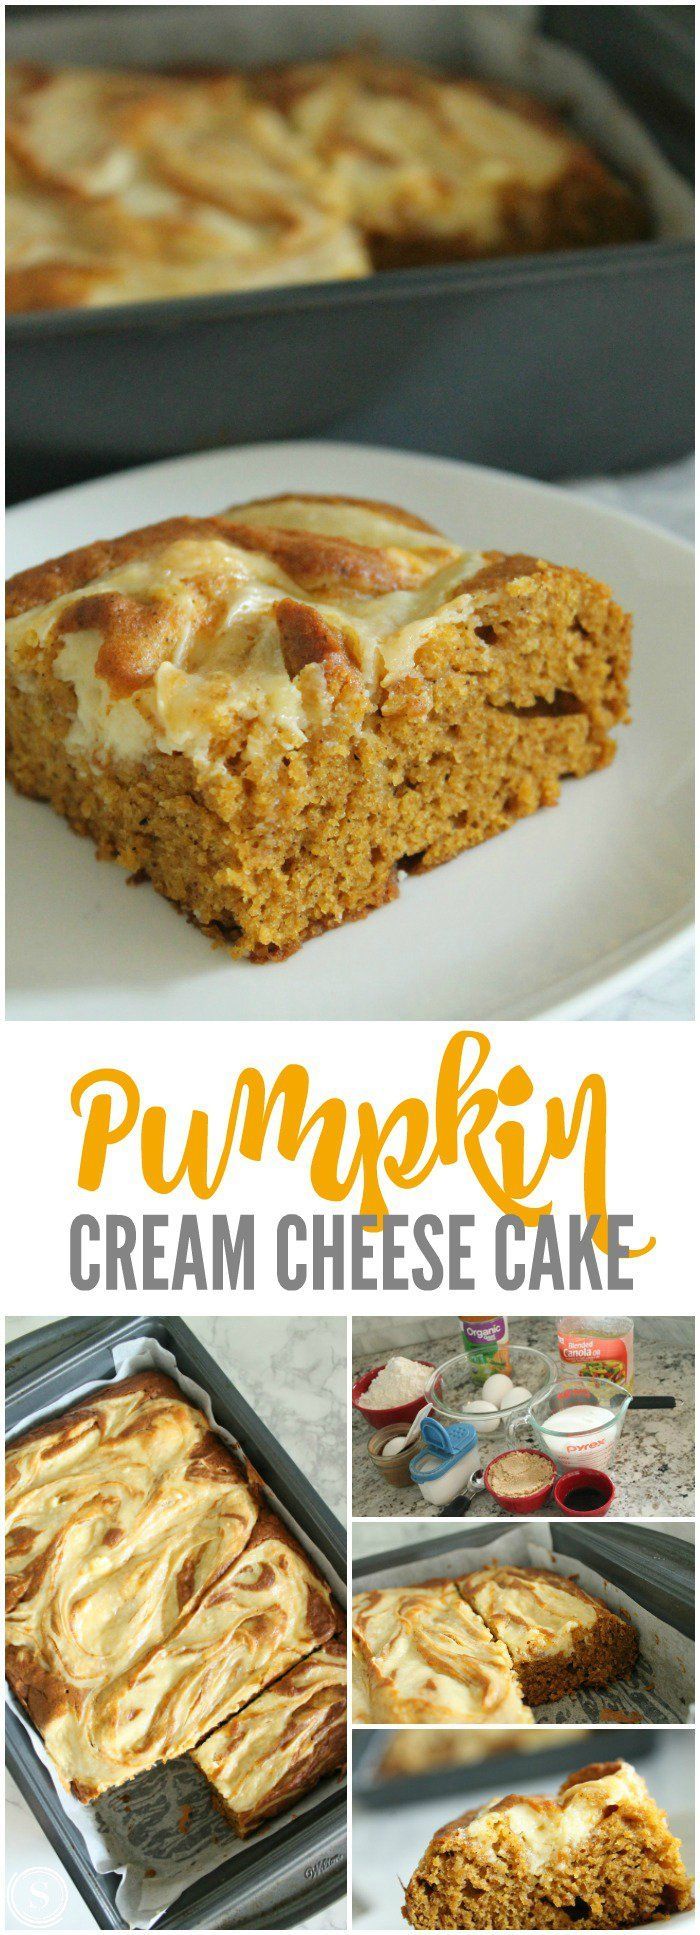 Pumpkin Cream Cheese Cake! Easy Dessert Recipe for Fall and Thanksgiving! One of my NEW favorite Fall